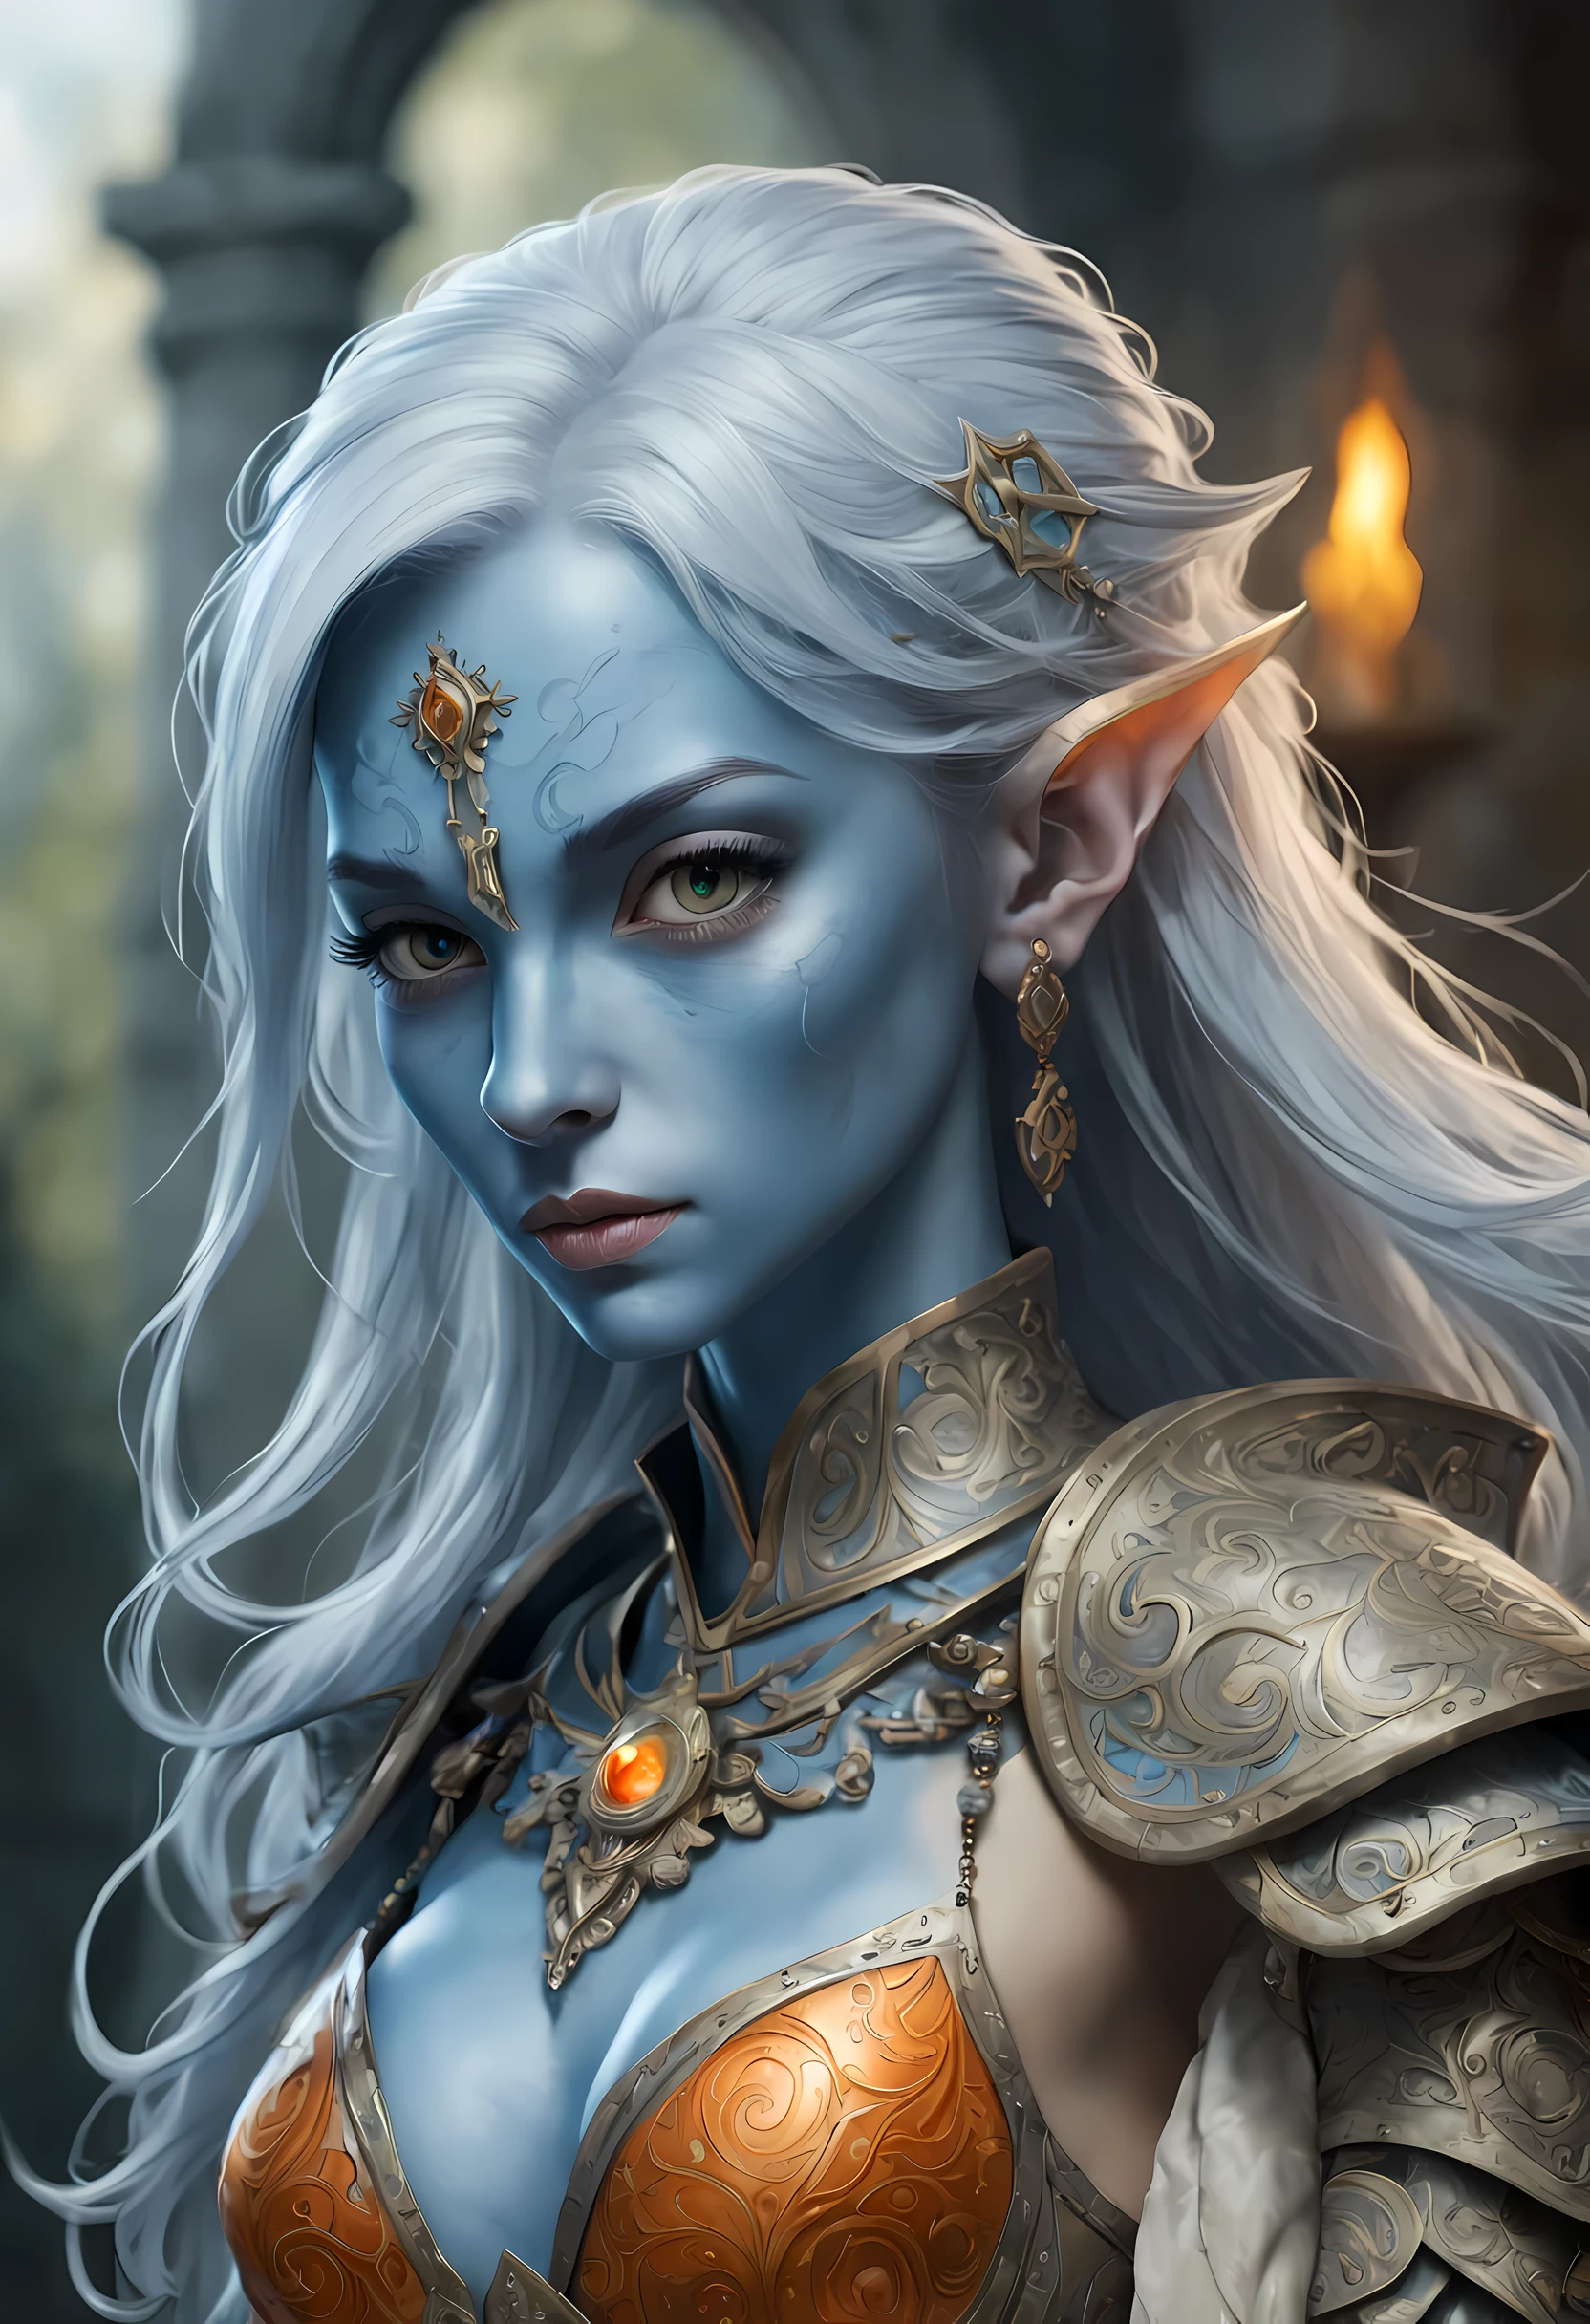 fantasy art, dnd art, RPG art, wide shot, (masterpiece: 1.4) a (portrait: 1.3) intense details, highly detailed, photorealistic, best quality, highres, portrait a female (fantasy art, Masterpiece, best quality: 1.3) ((blue skin: 1.5)), intense details facial details, exquisite beauty, (fantasy art, Masterpiece, best quality) cleric, (blue: 1.3) skinned female, white hair, long hair, (hair hides ears: 1.5), (green: 1.3) eye, fantasy art, Masterpiece, best quality) armed a fiery sword red fire, wearing heavy (white: 1.3) half plate mail armor, wearing high heeled laced boots, wearing an(orange :1.3) cloak, wearing glowing holy symbol GlowingRunes_yellow, within fantasy temple background, reflection light, high details, best quality, 16k, [ultra detailed], masterpiece, best quality, (extremely detailed), close up, ultra wide shot, photorealistic, RAW, fantasy art, dnd art, fantasy art, realistic art,((best quality)), ((masterpiece)), (detailed), perfect face,